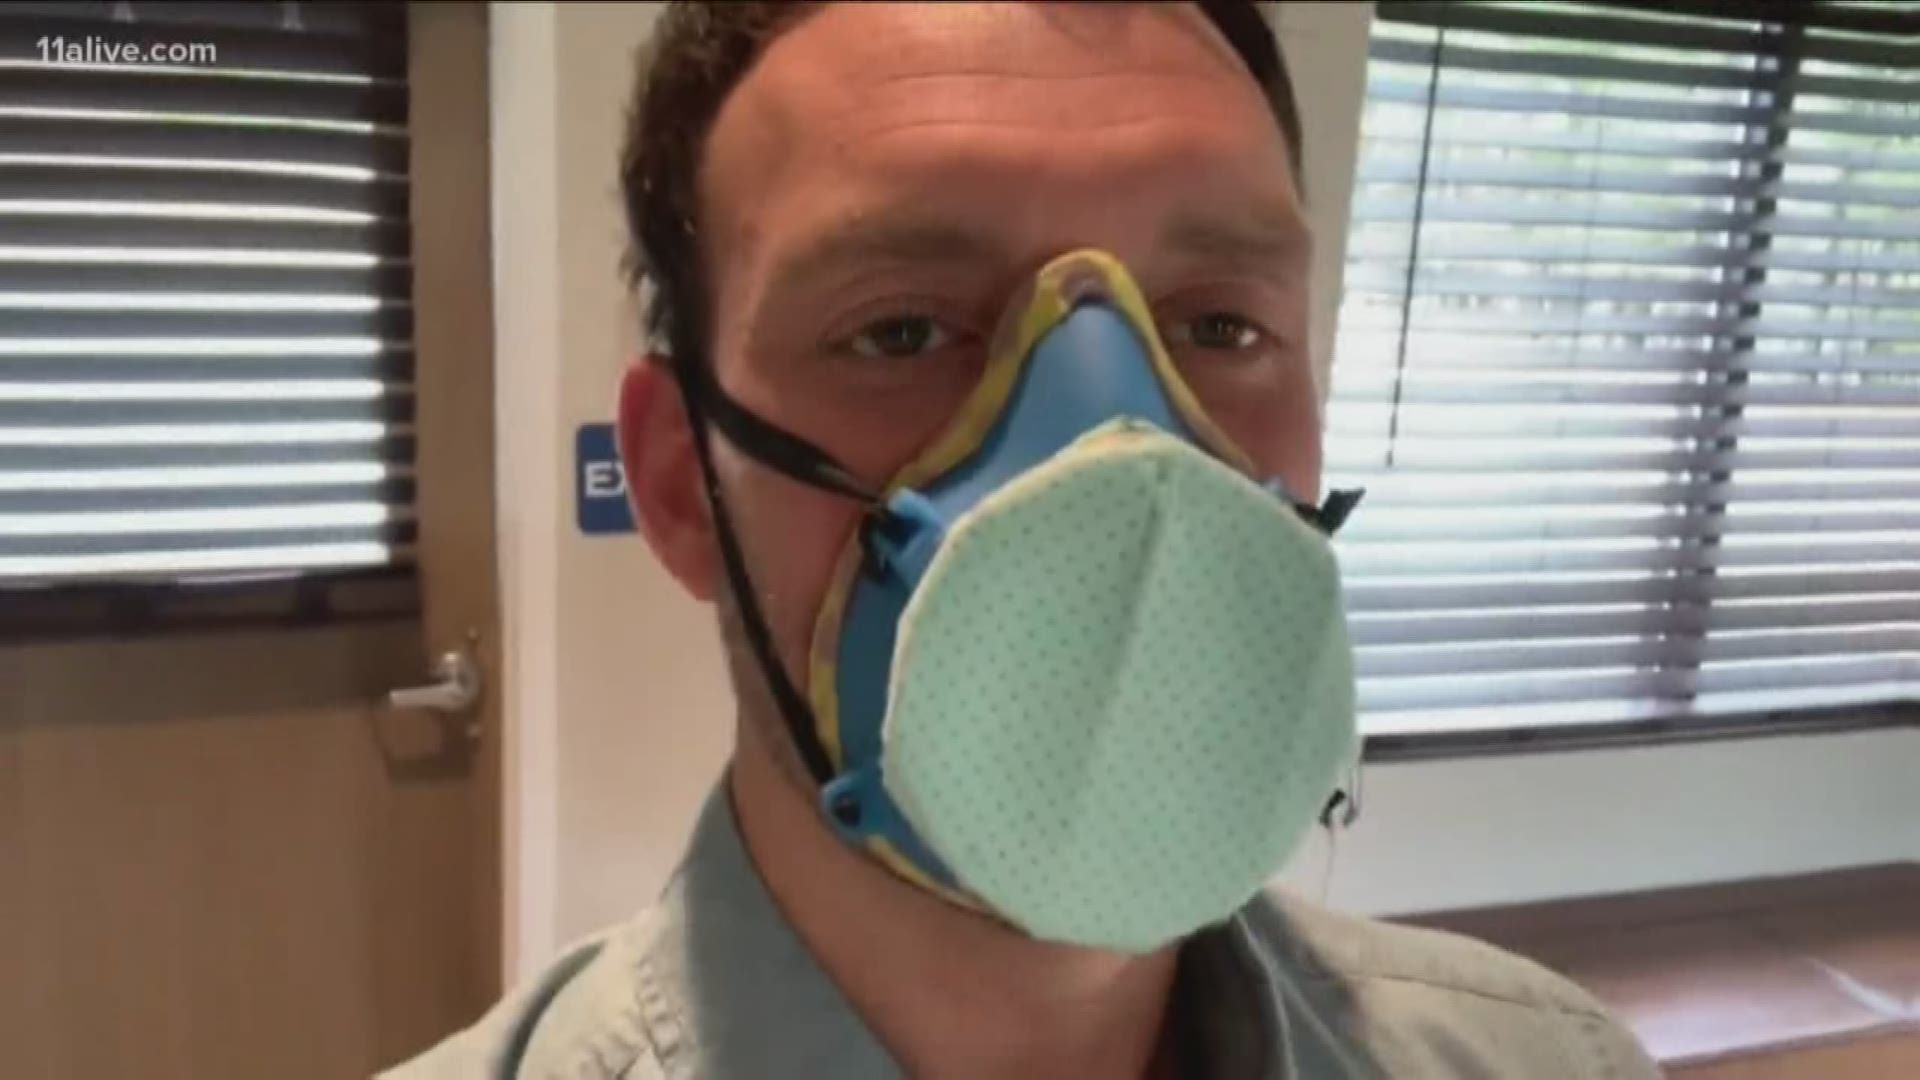 Those with a 3D printer can make a mask that when added with the correct filter and seal can relieve national shortages for those on the front line of coronavirus.